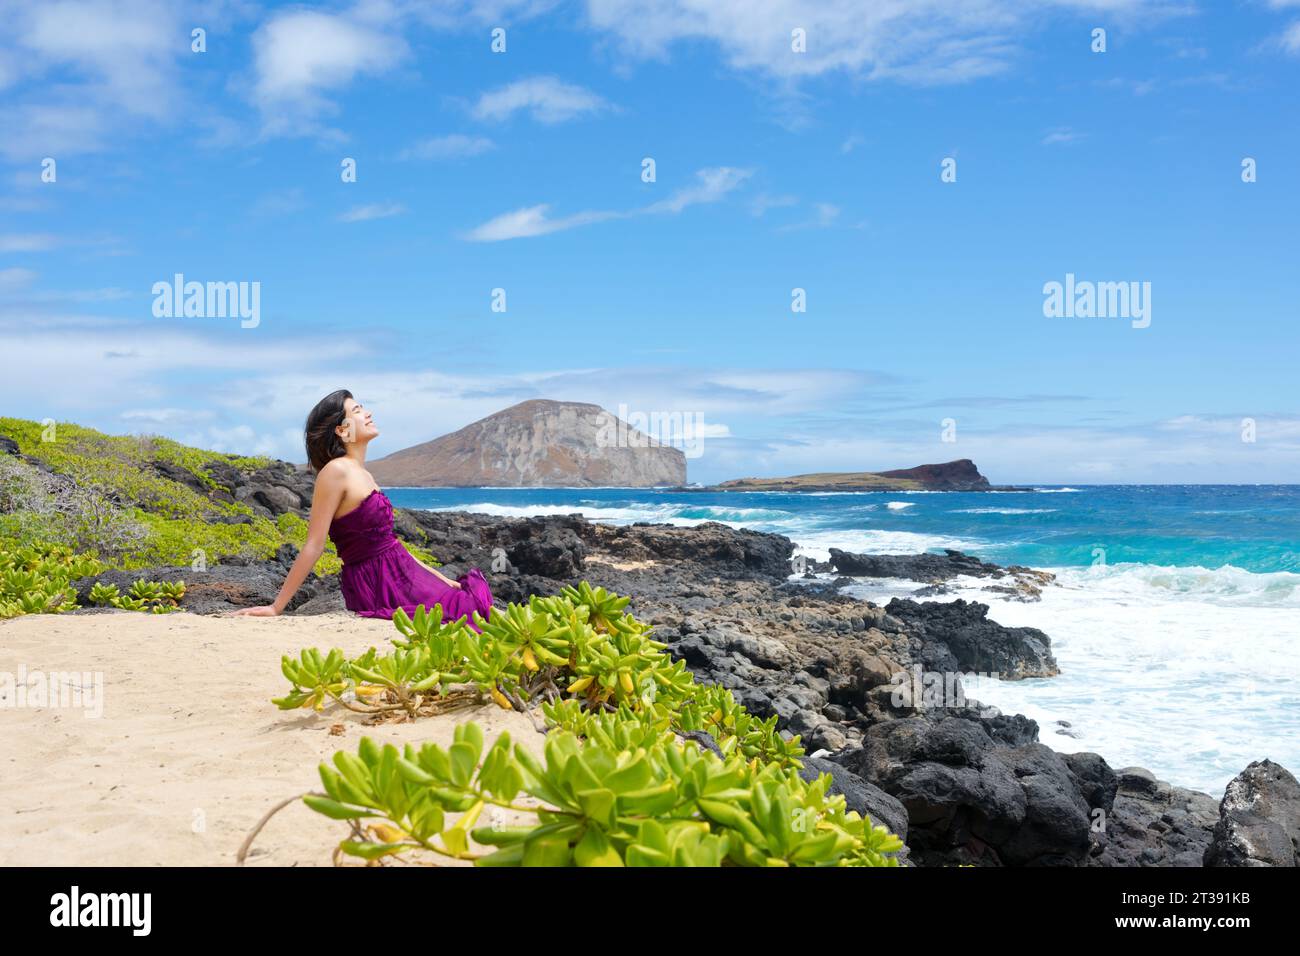 One young woman in purple dress sitting on rocky shore looking out over ocean at Makapu'u beach in Oahu, Hawaii Stock Photo